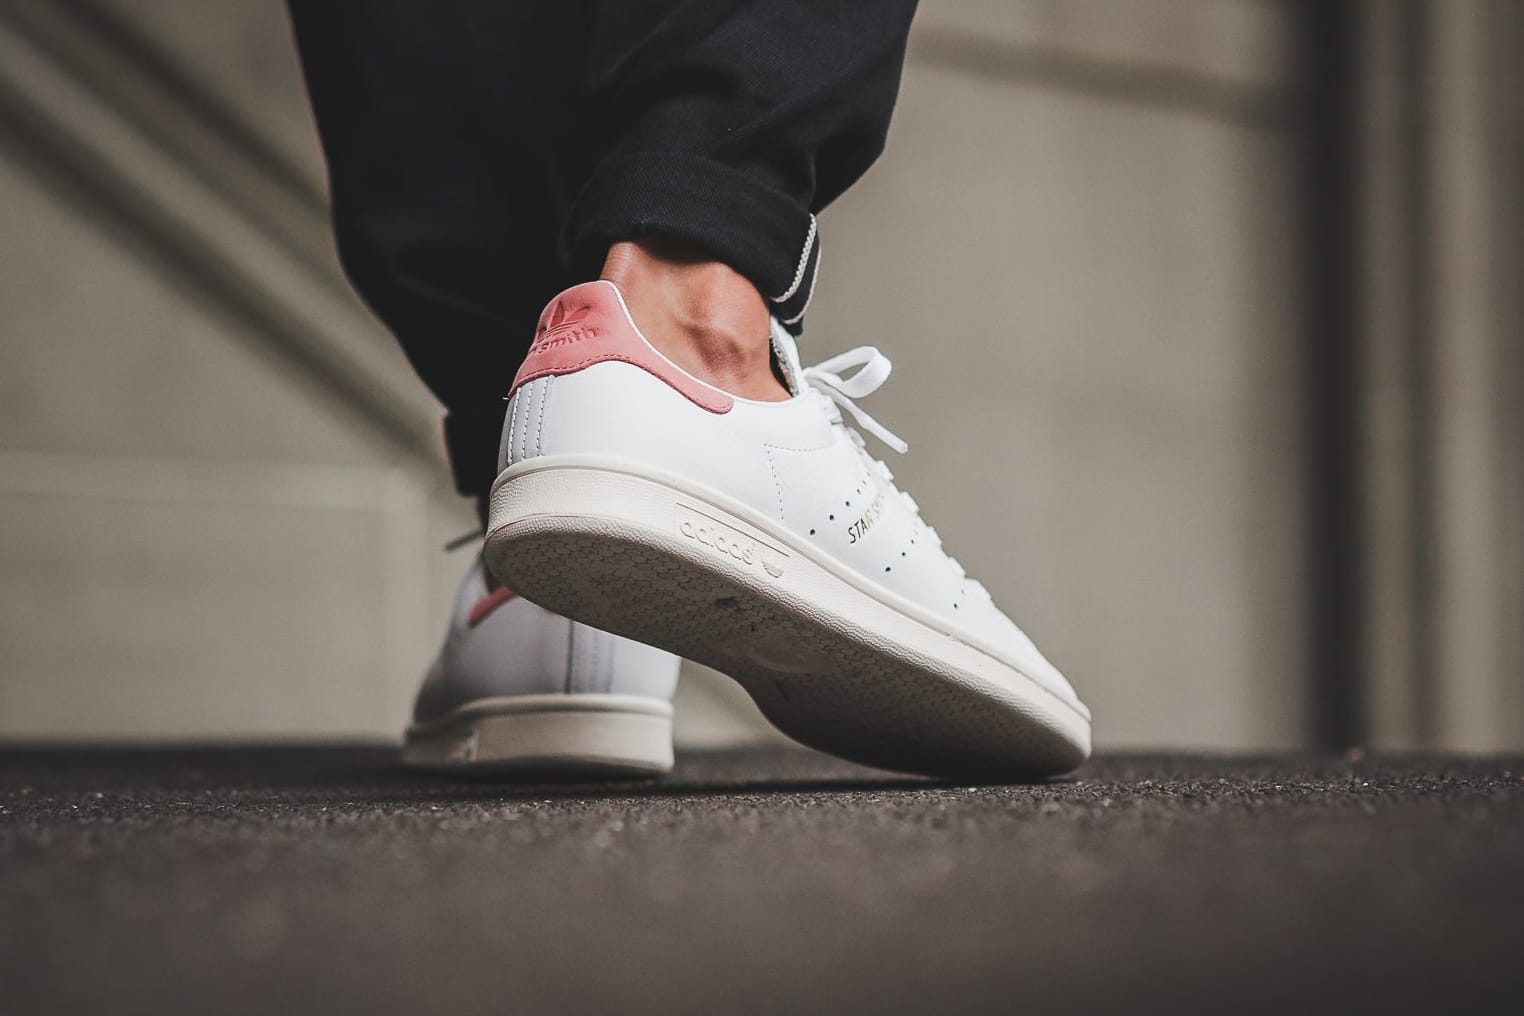 o-ray stan smith shoes